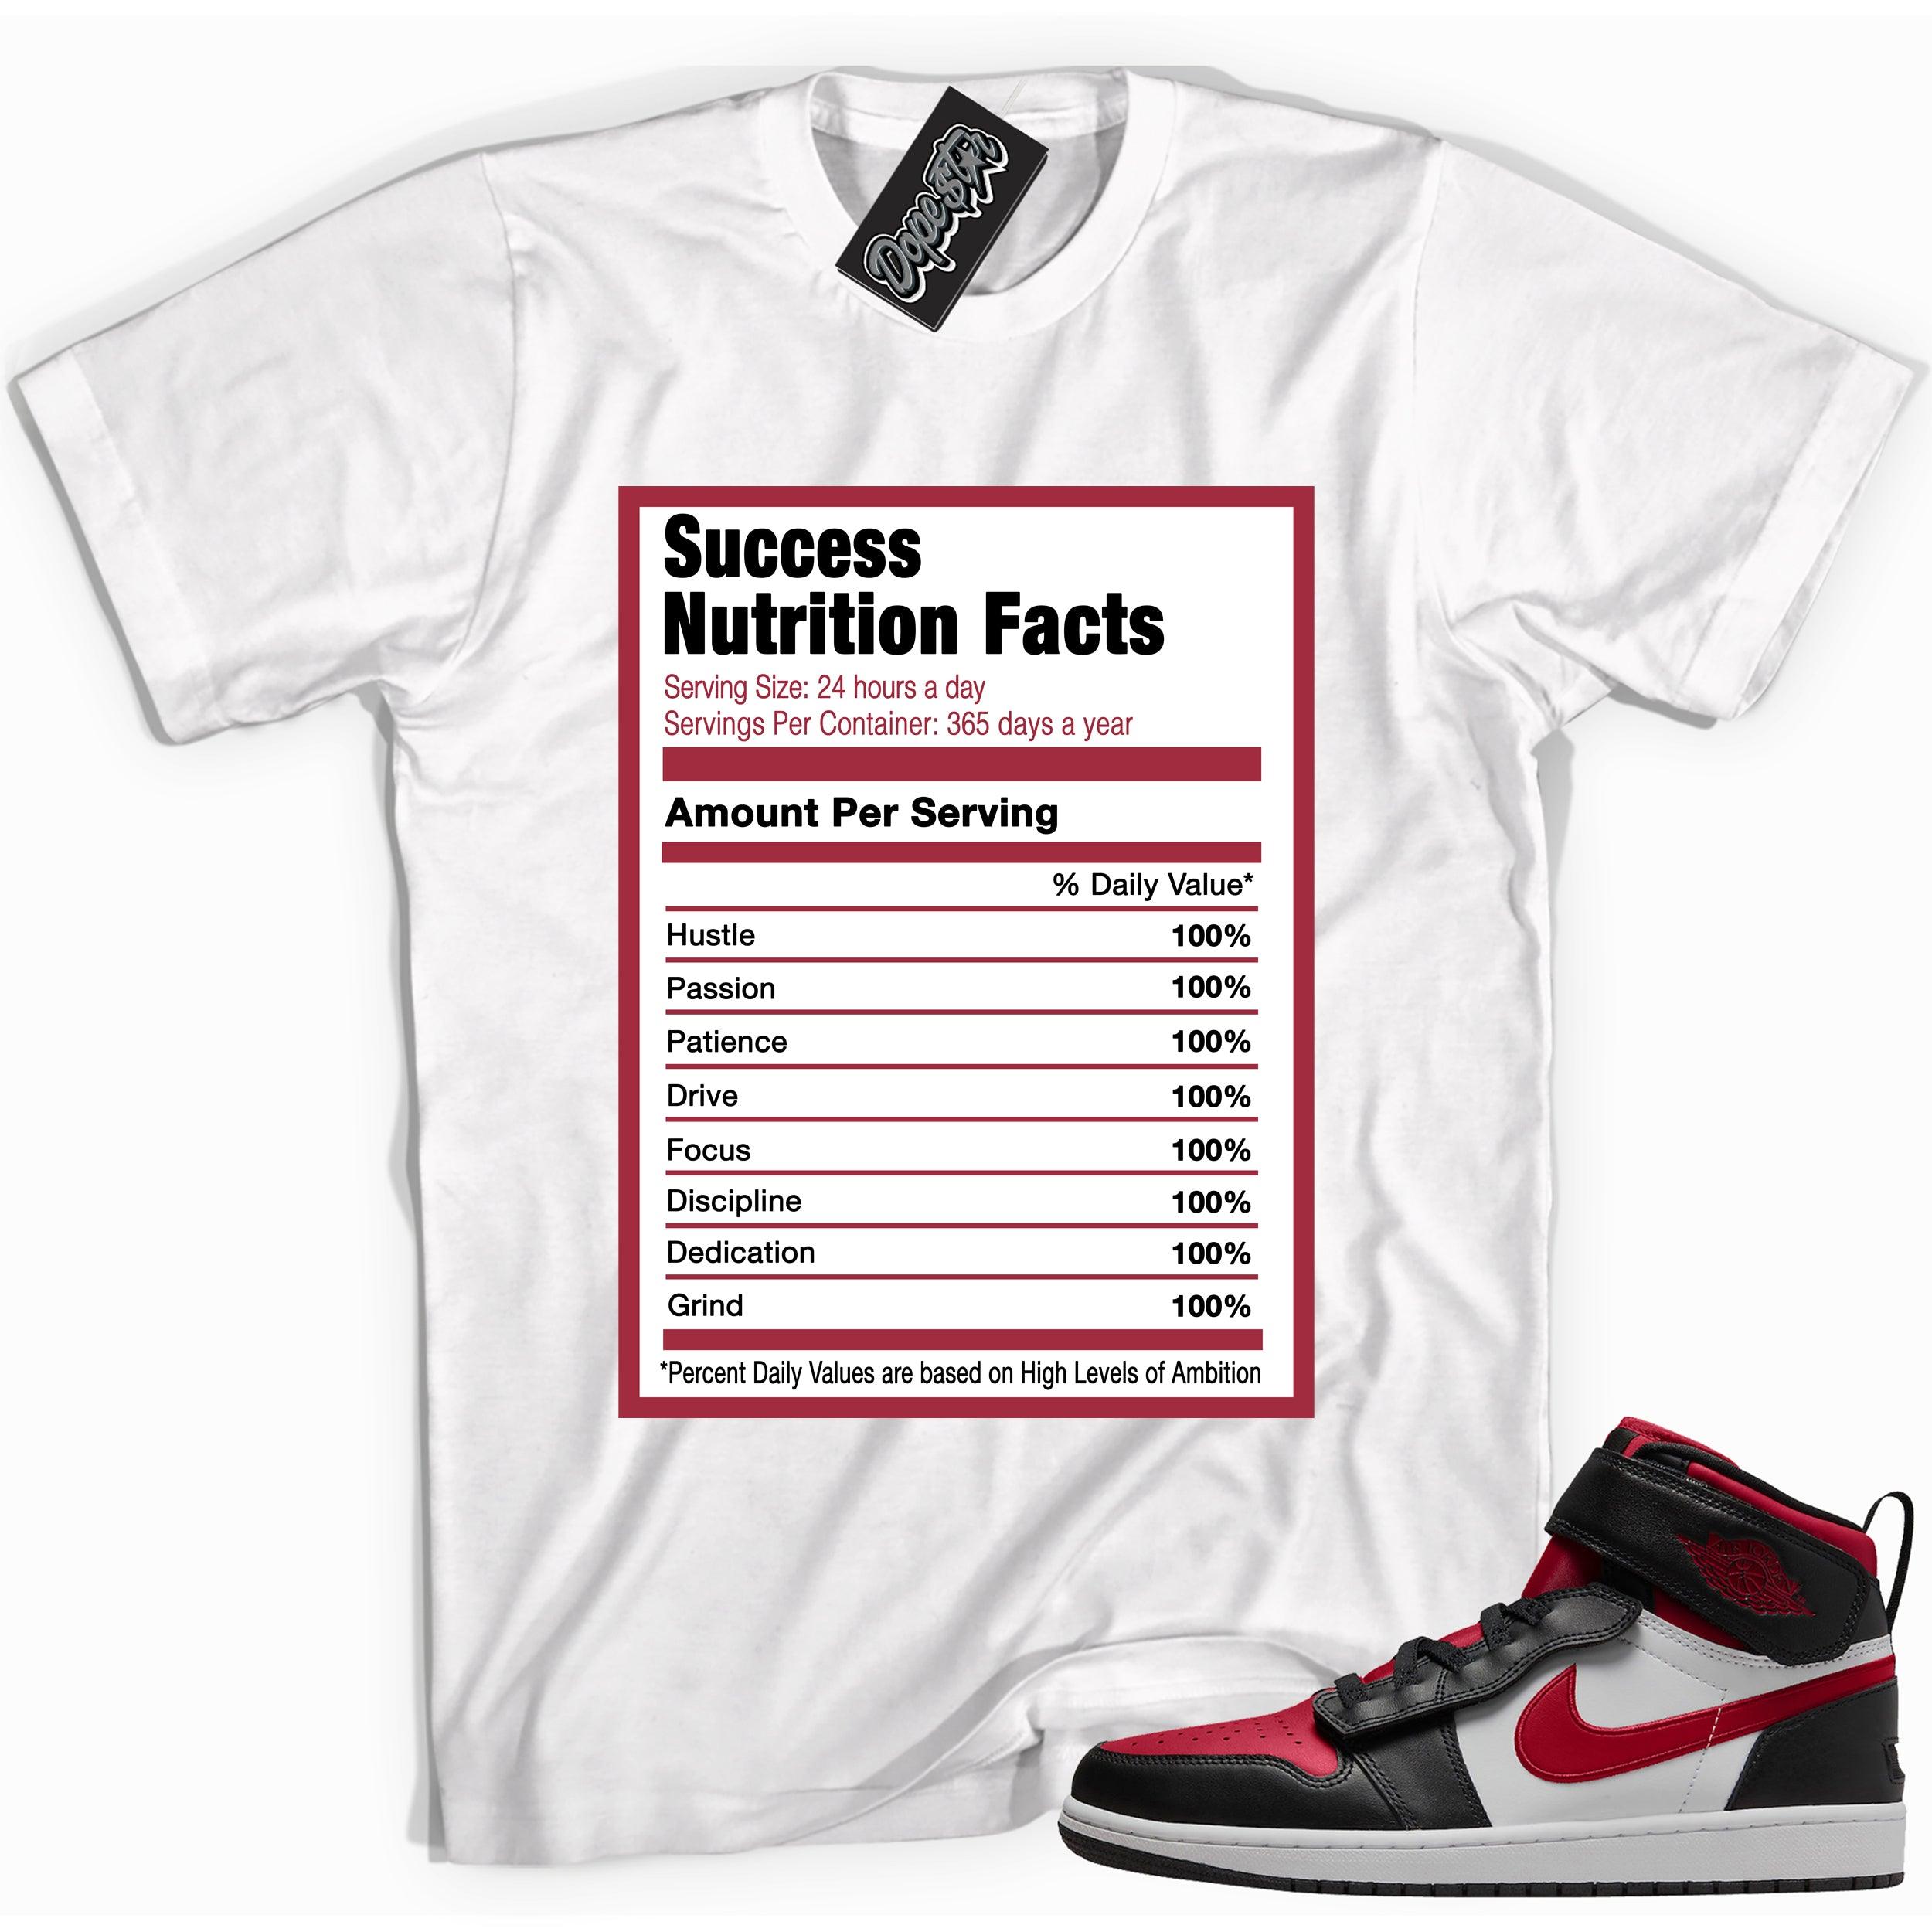 Success Nutrition Sneaker Tee AJ 1 High FlyEase Black White Fire Red photo